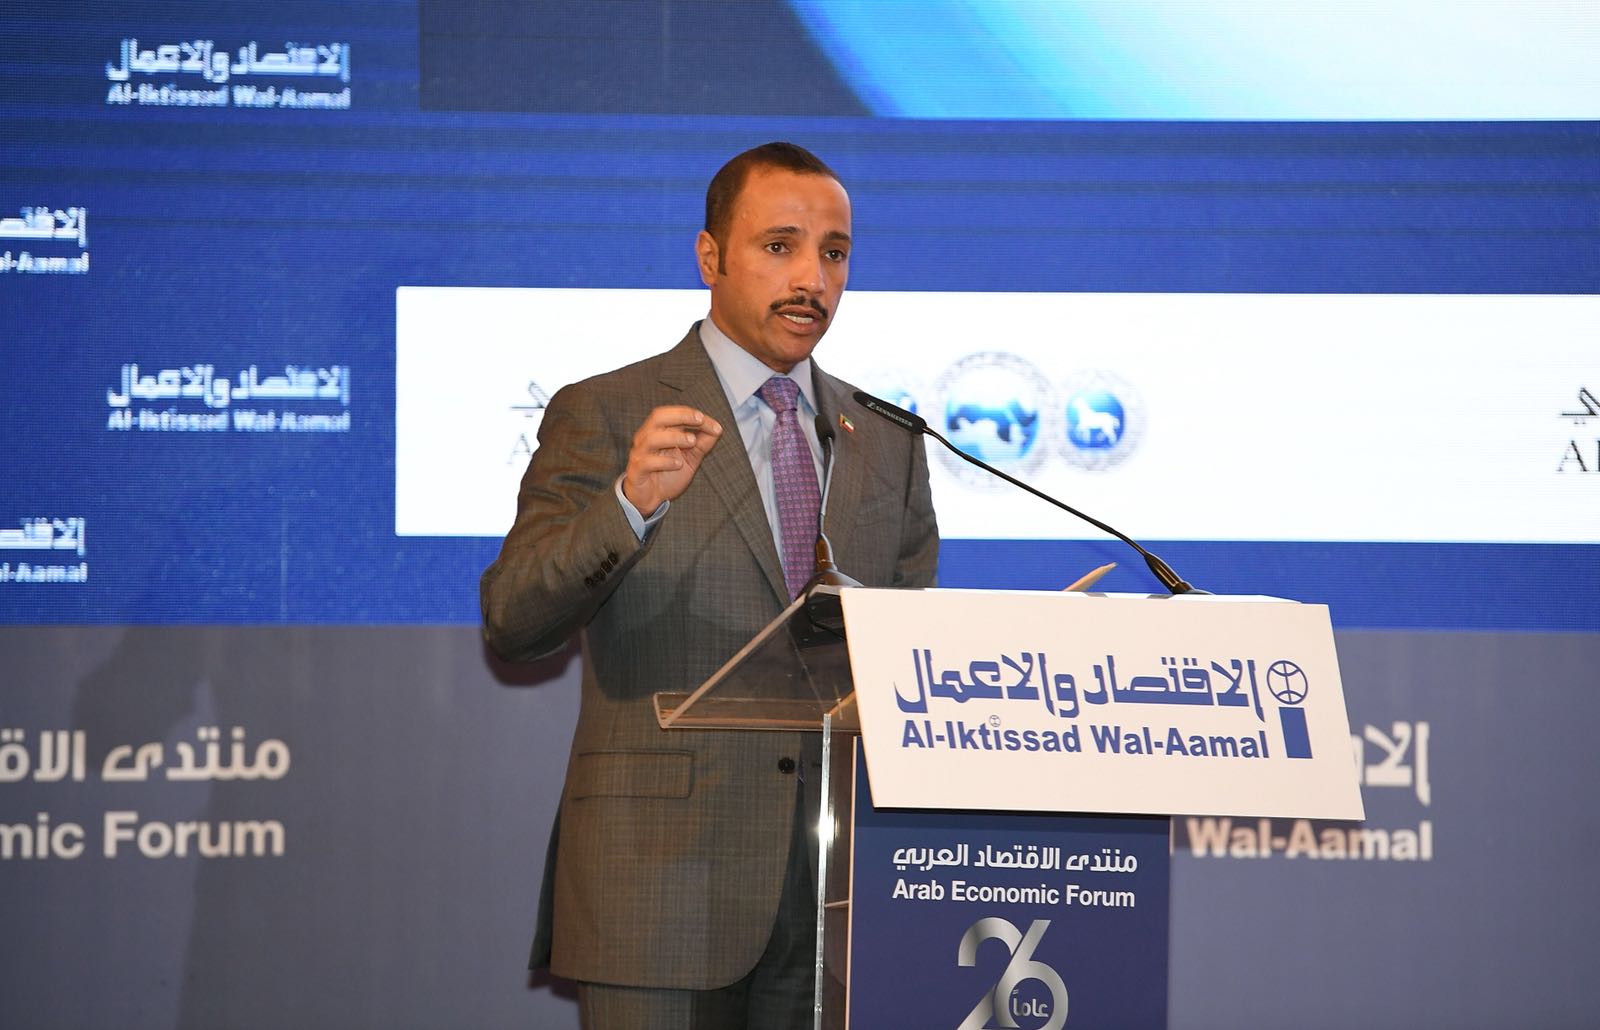 Kuwaiti Speaker of the National Assembly Marzouq Al-Ghanim during his speech at the Arab Economic Forum held in Beirut and patronized by Prime Minister Saad Al-Hariri